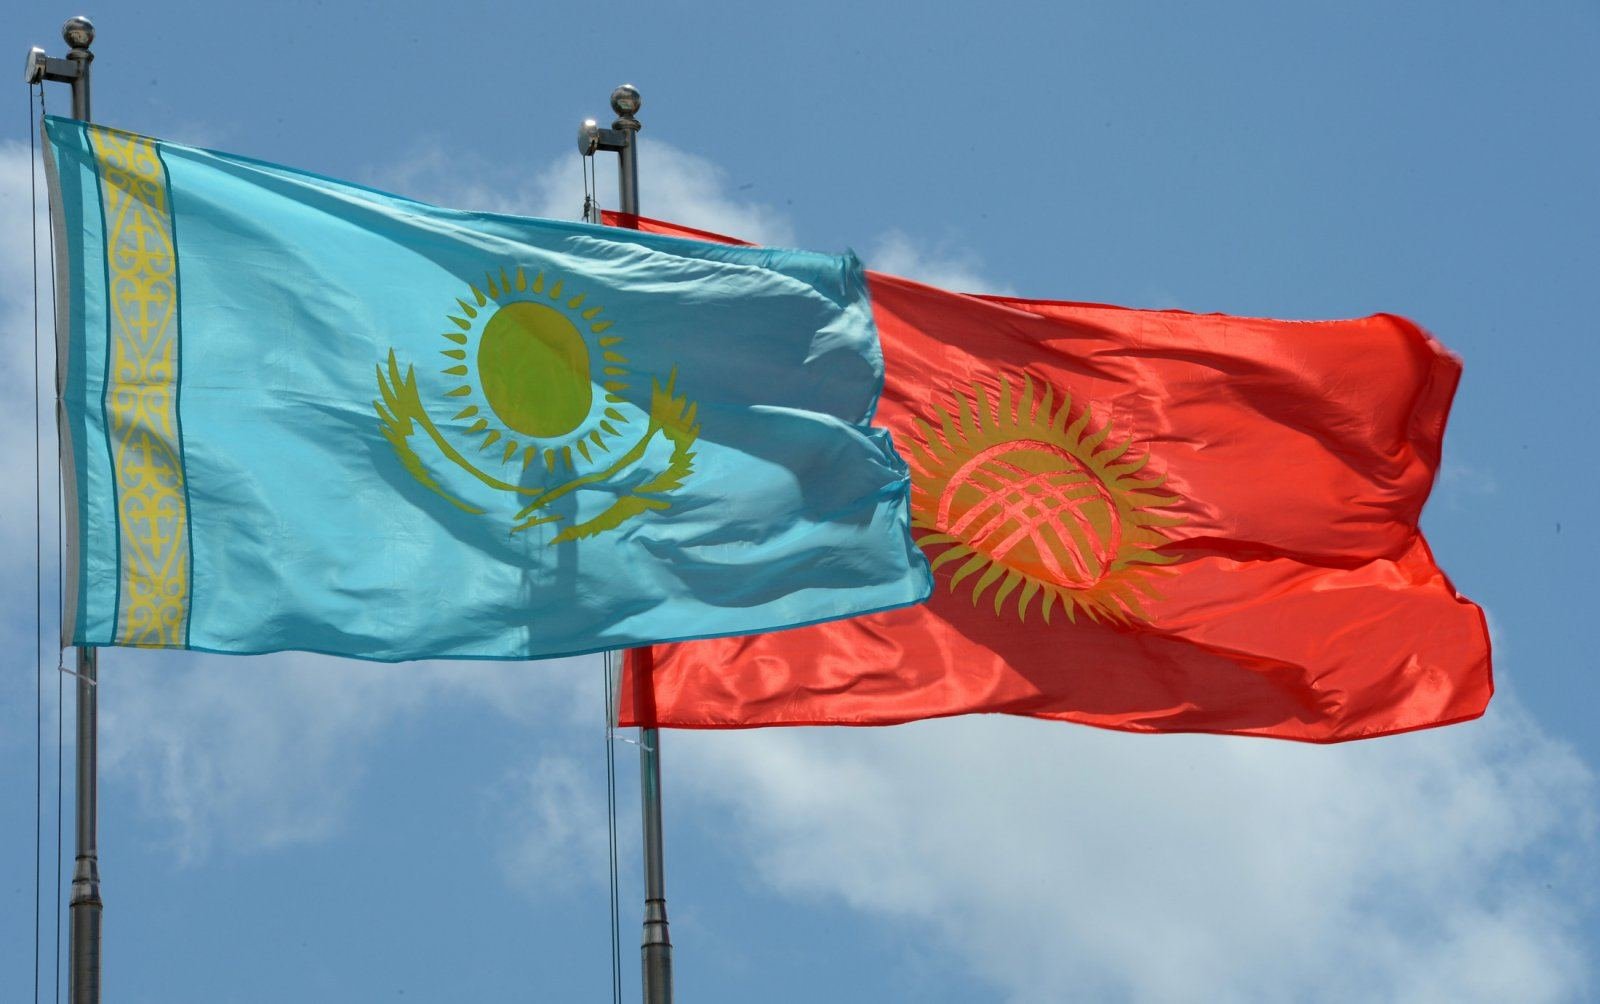 Kazakhstan, Kyrgyzstan to sign agreement on expanding allied relations